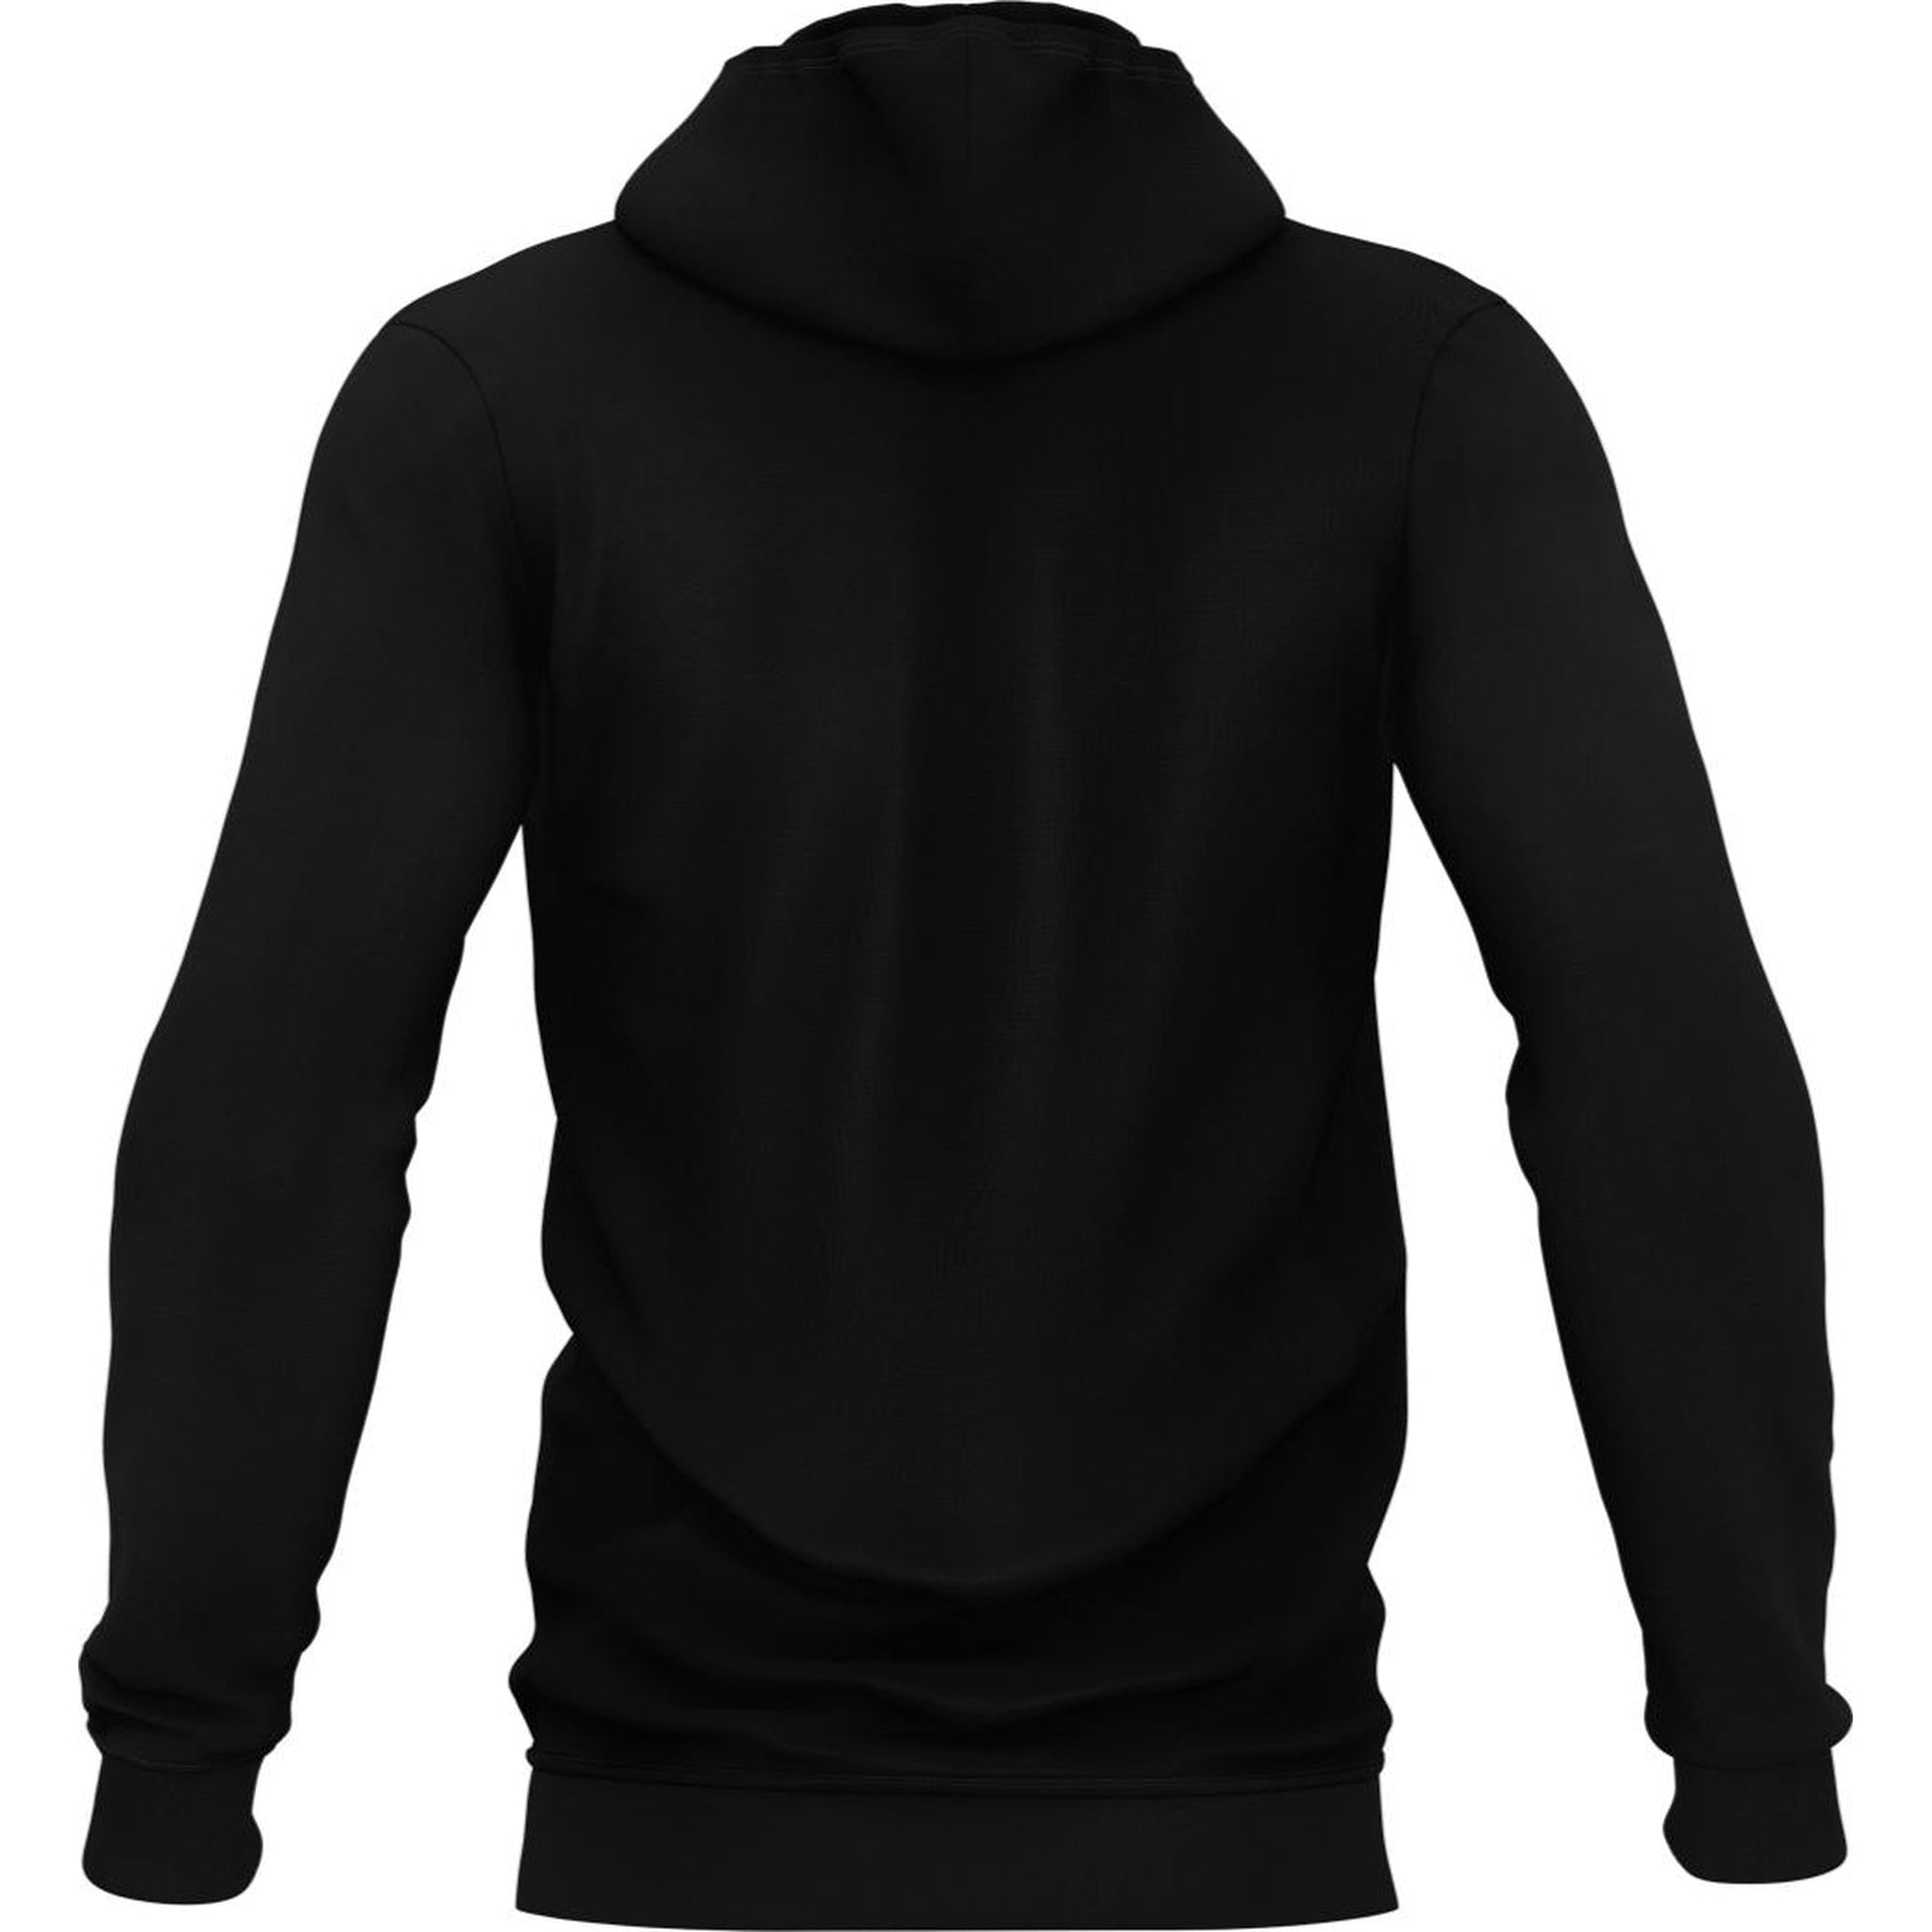 [COMFY] Performance Hoodie [BLK]-13 Fifty Apparel